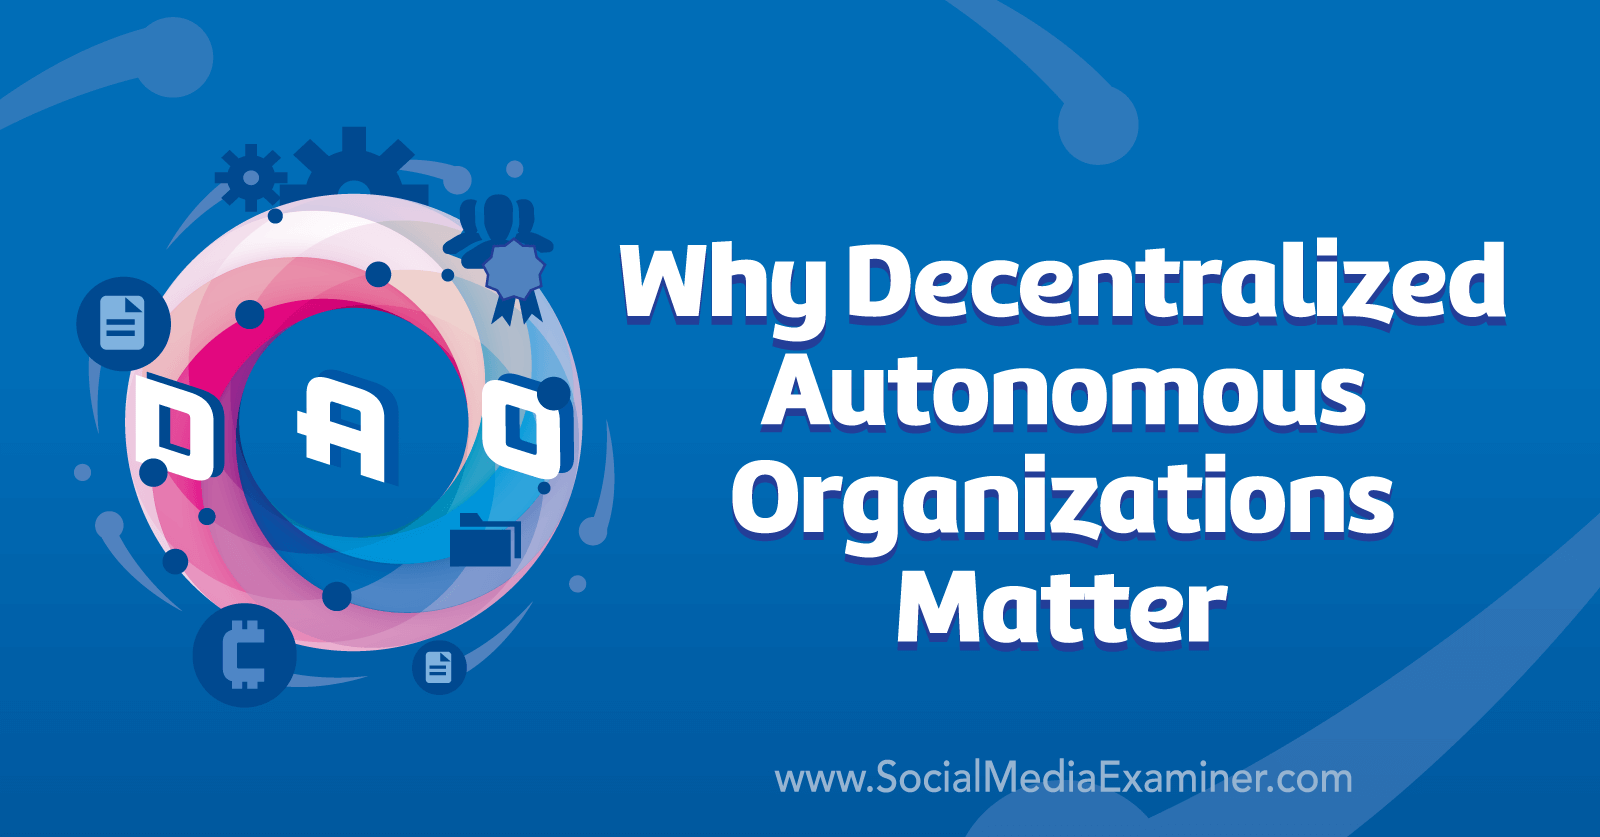 Why Decentralized Autonomous Organizations Matter with insights from Denise Holt and Michael Stelzner